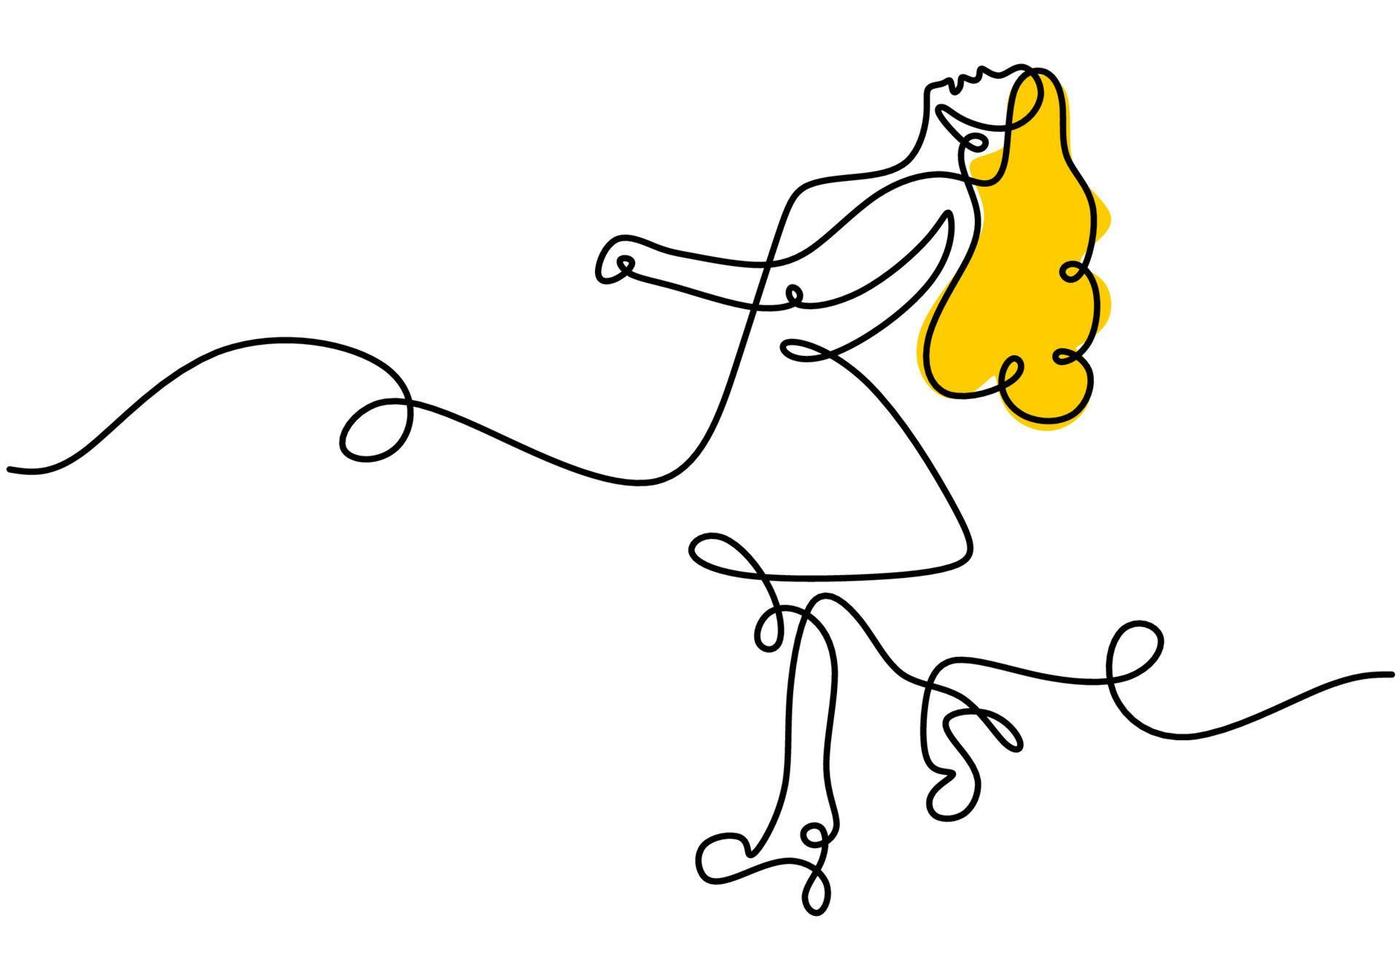 Continuous single line drawing of long yellow hair woman walk on street vector